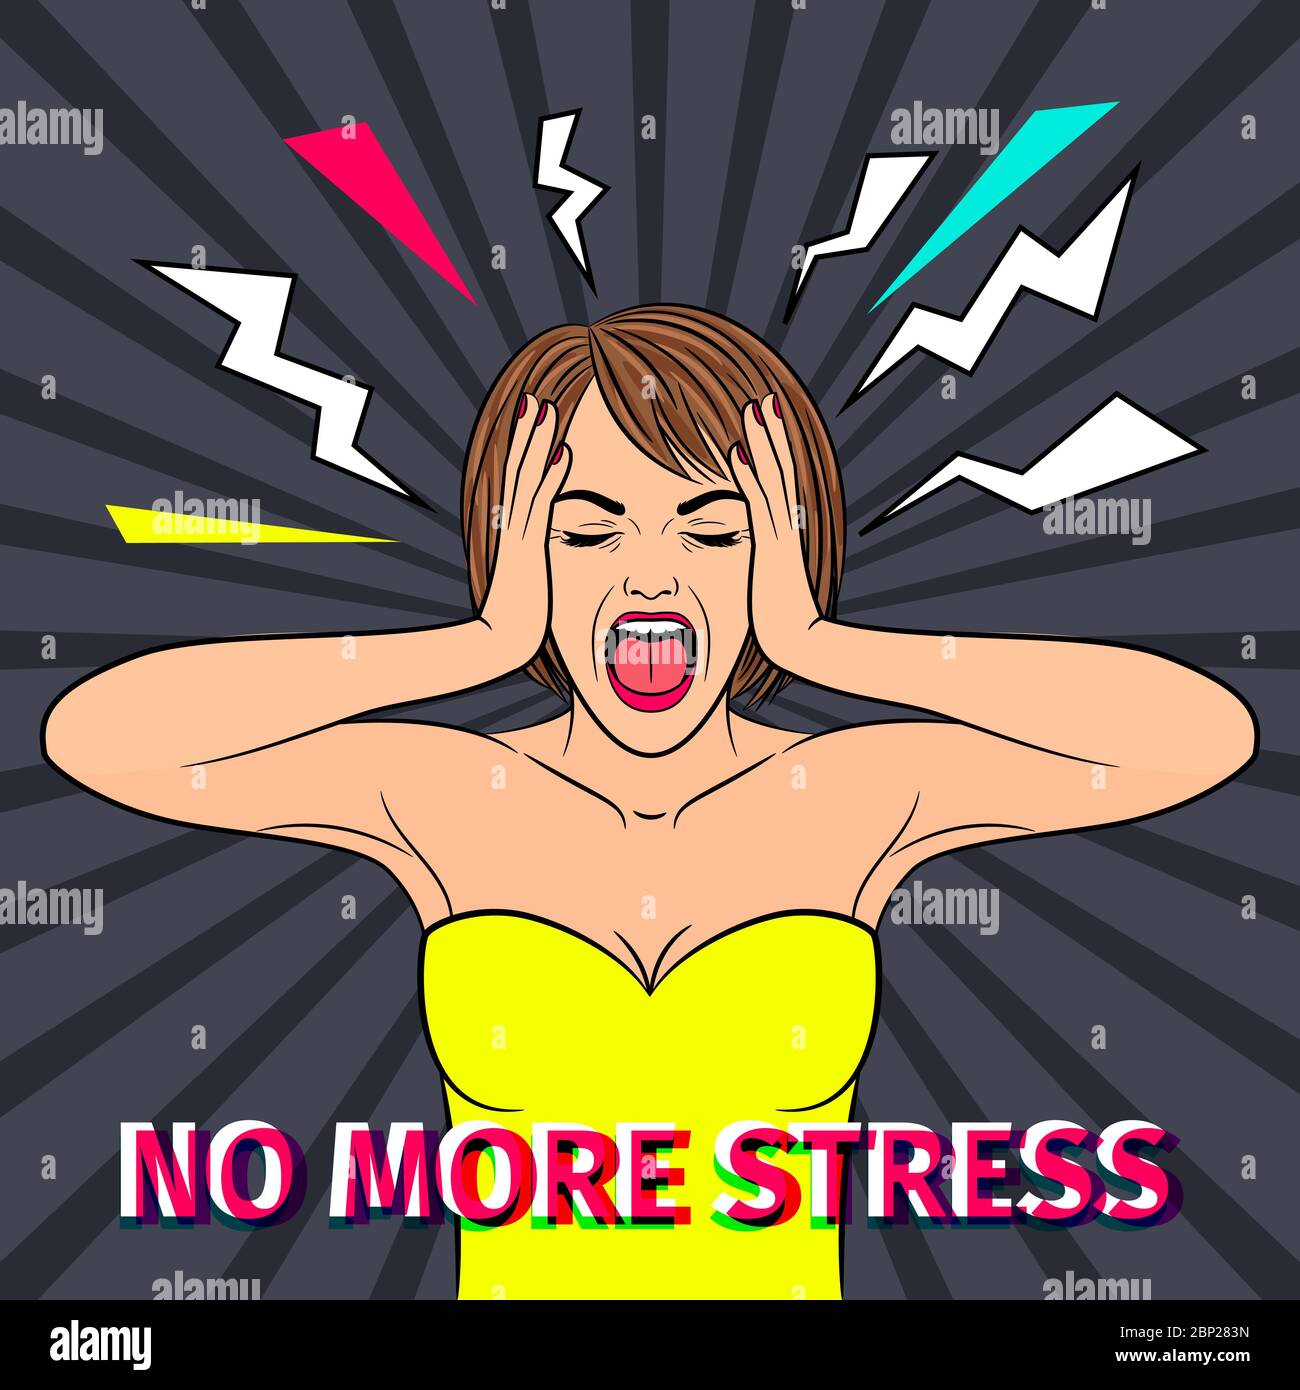 No stress. Shocked and scared retro woman face with no more stress text, vintage screaming girl vector illustration Stock Vector